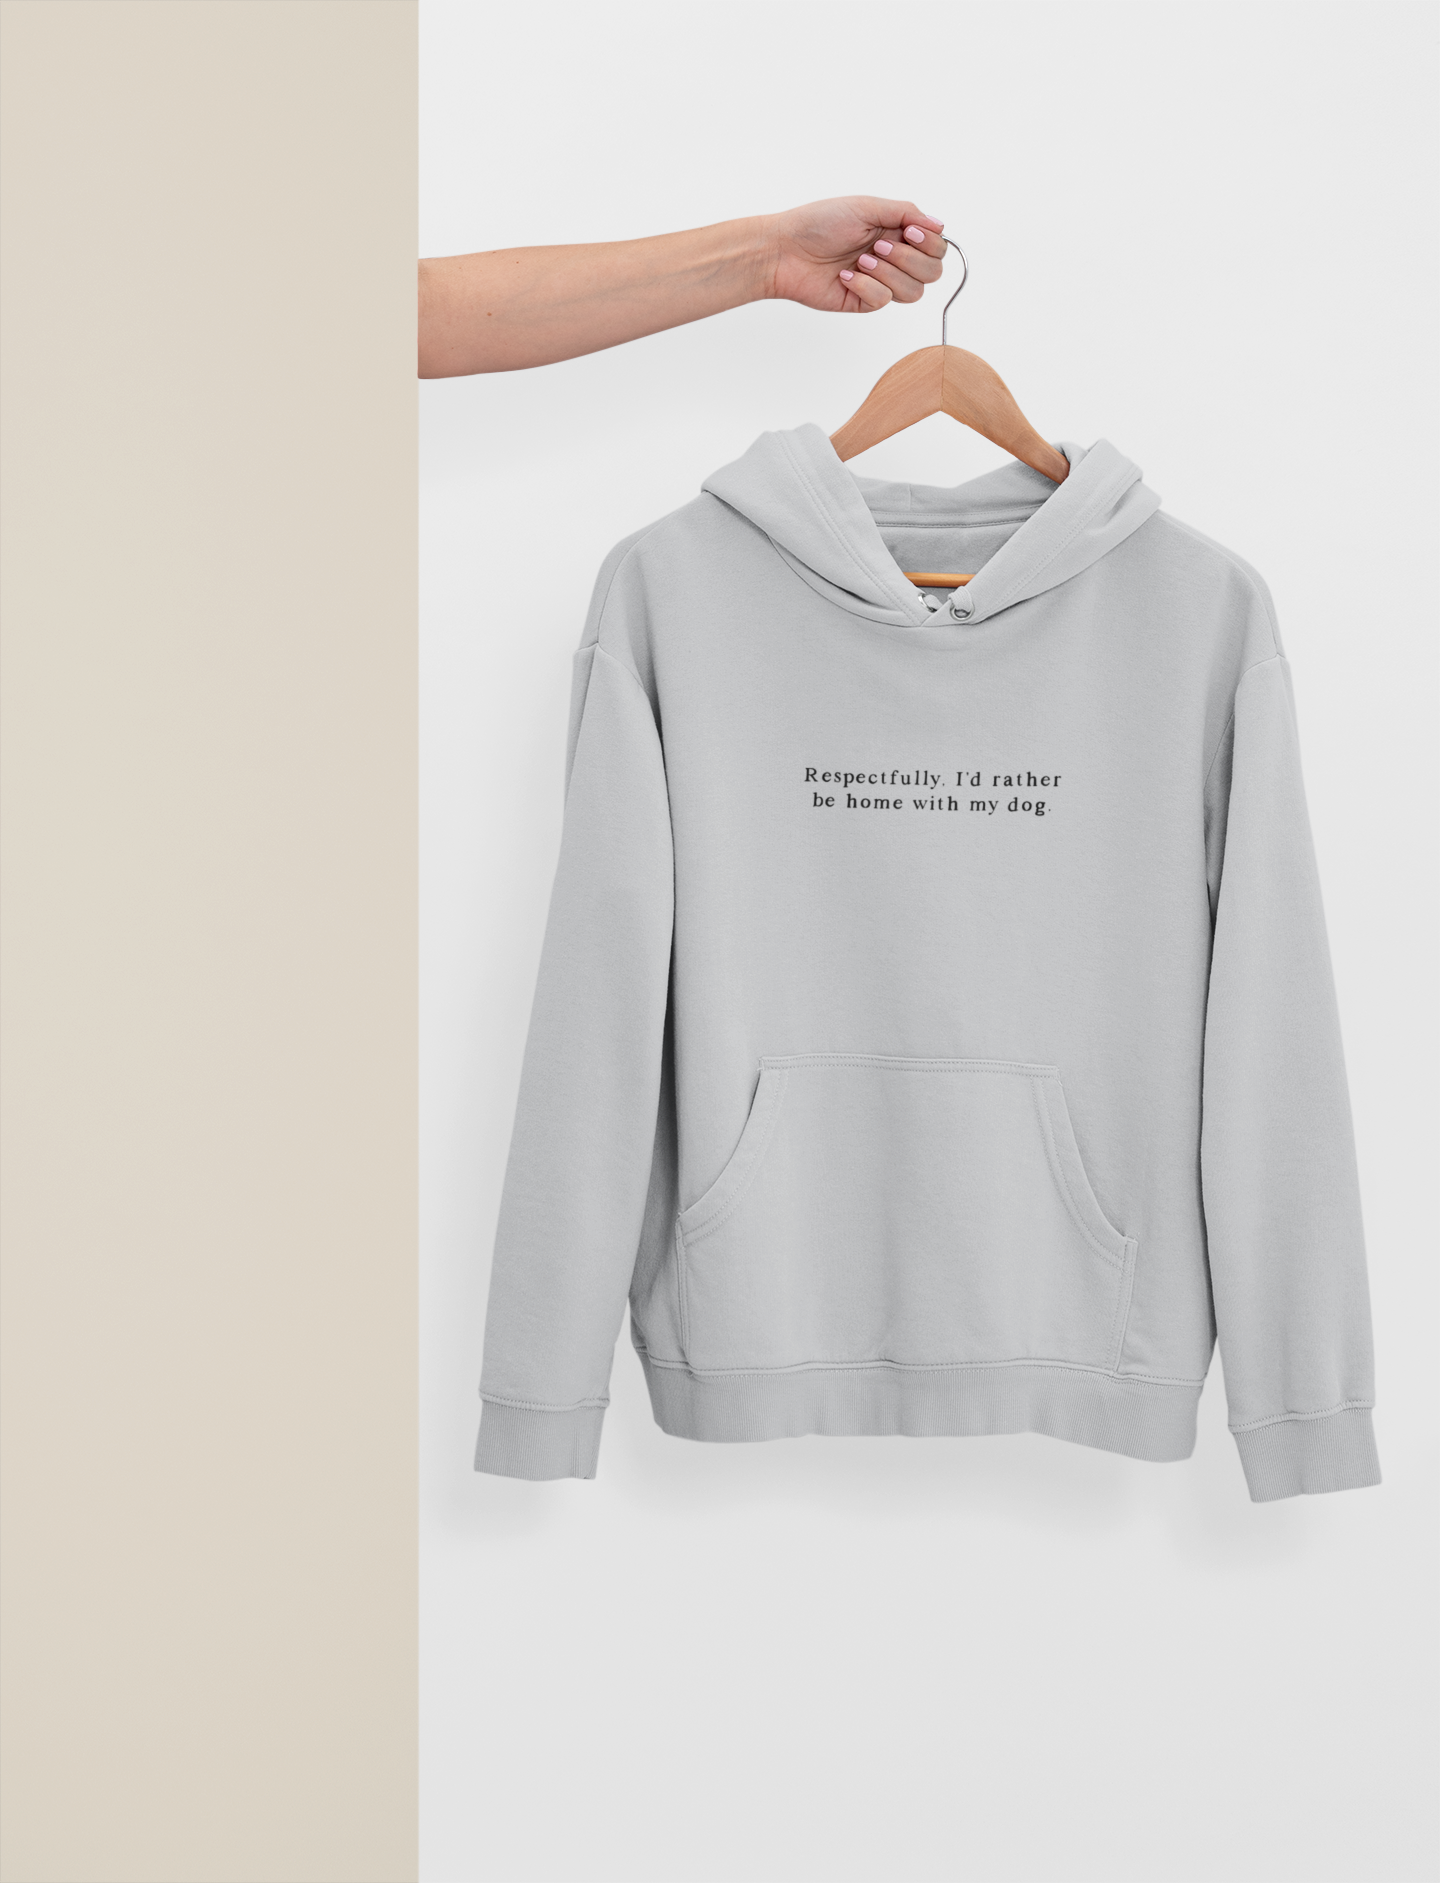 Embroidered | Respectfully, I'd Rather Be Home With My Dog | Unisex Hoodie